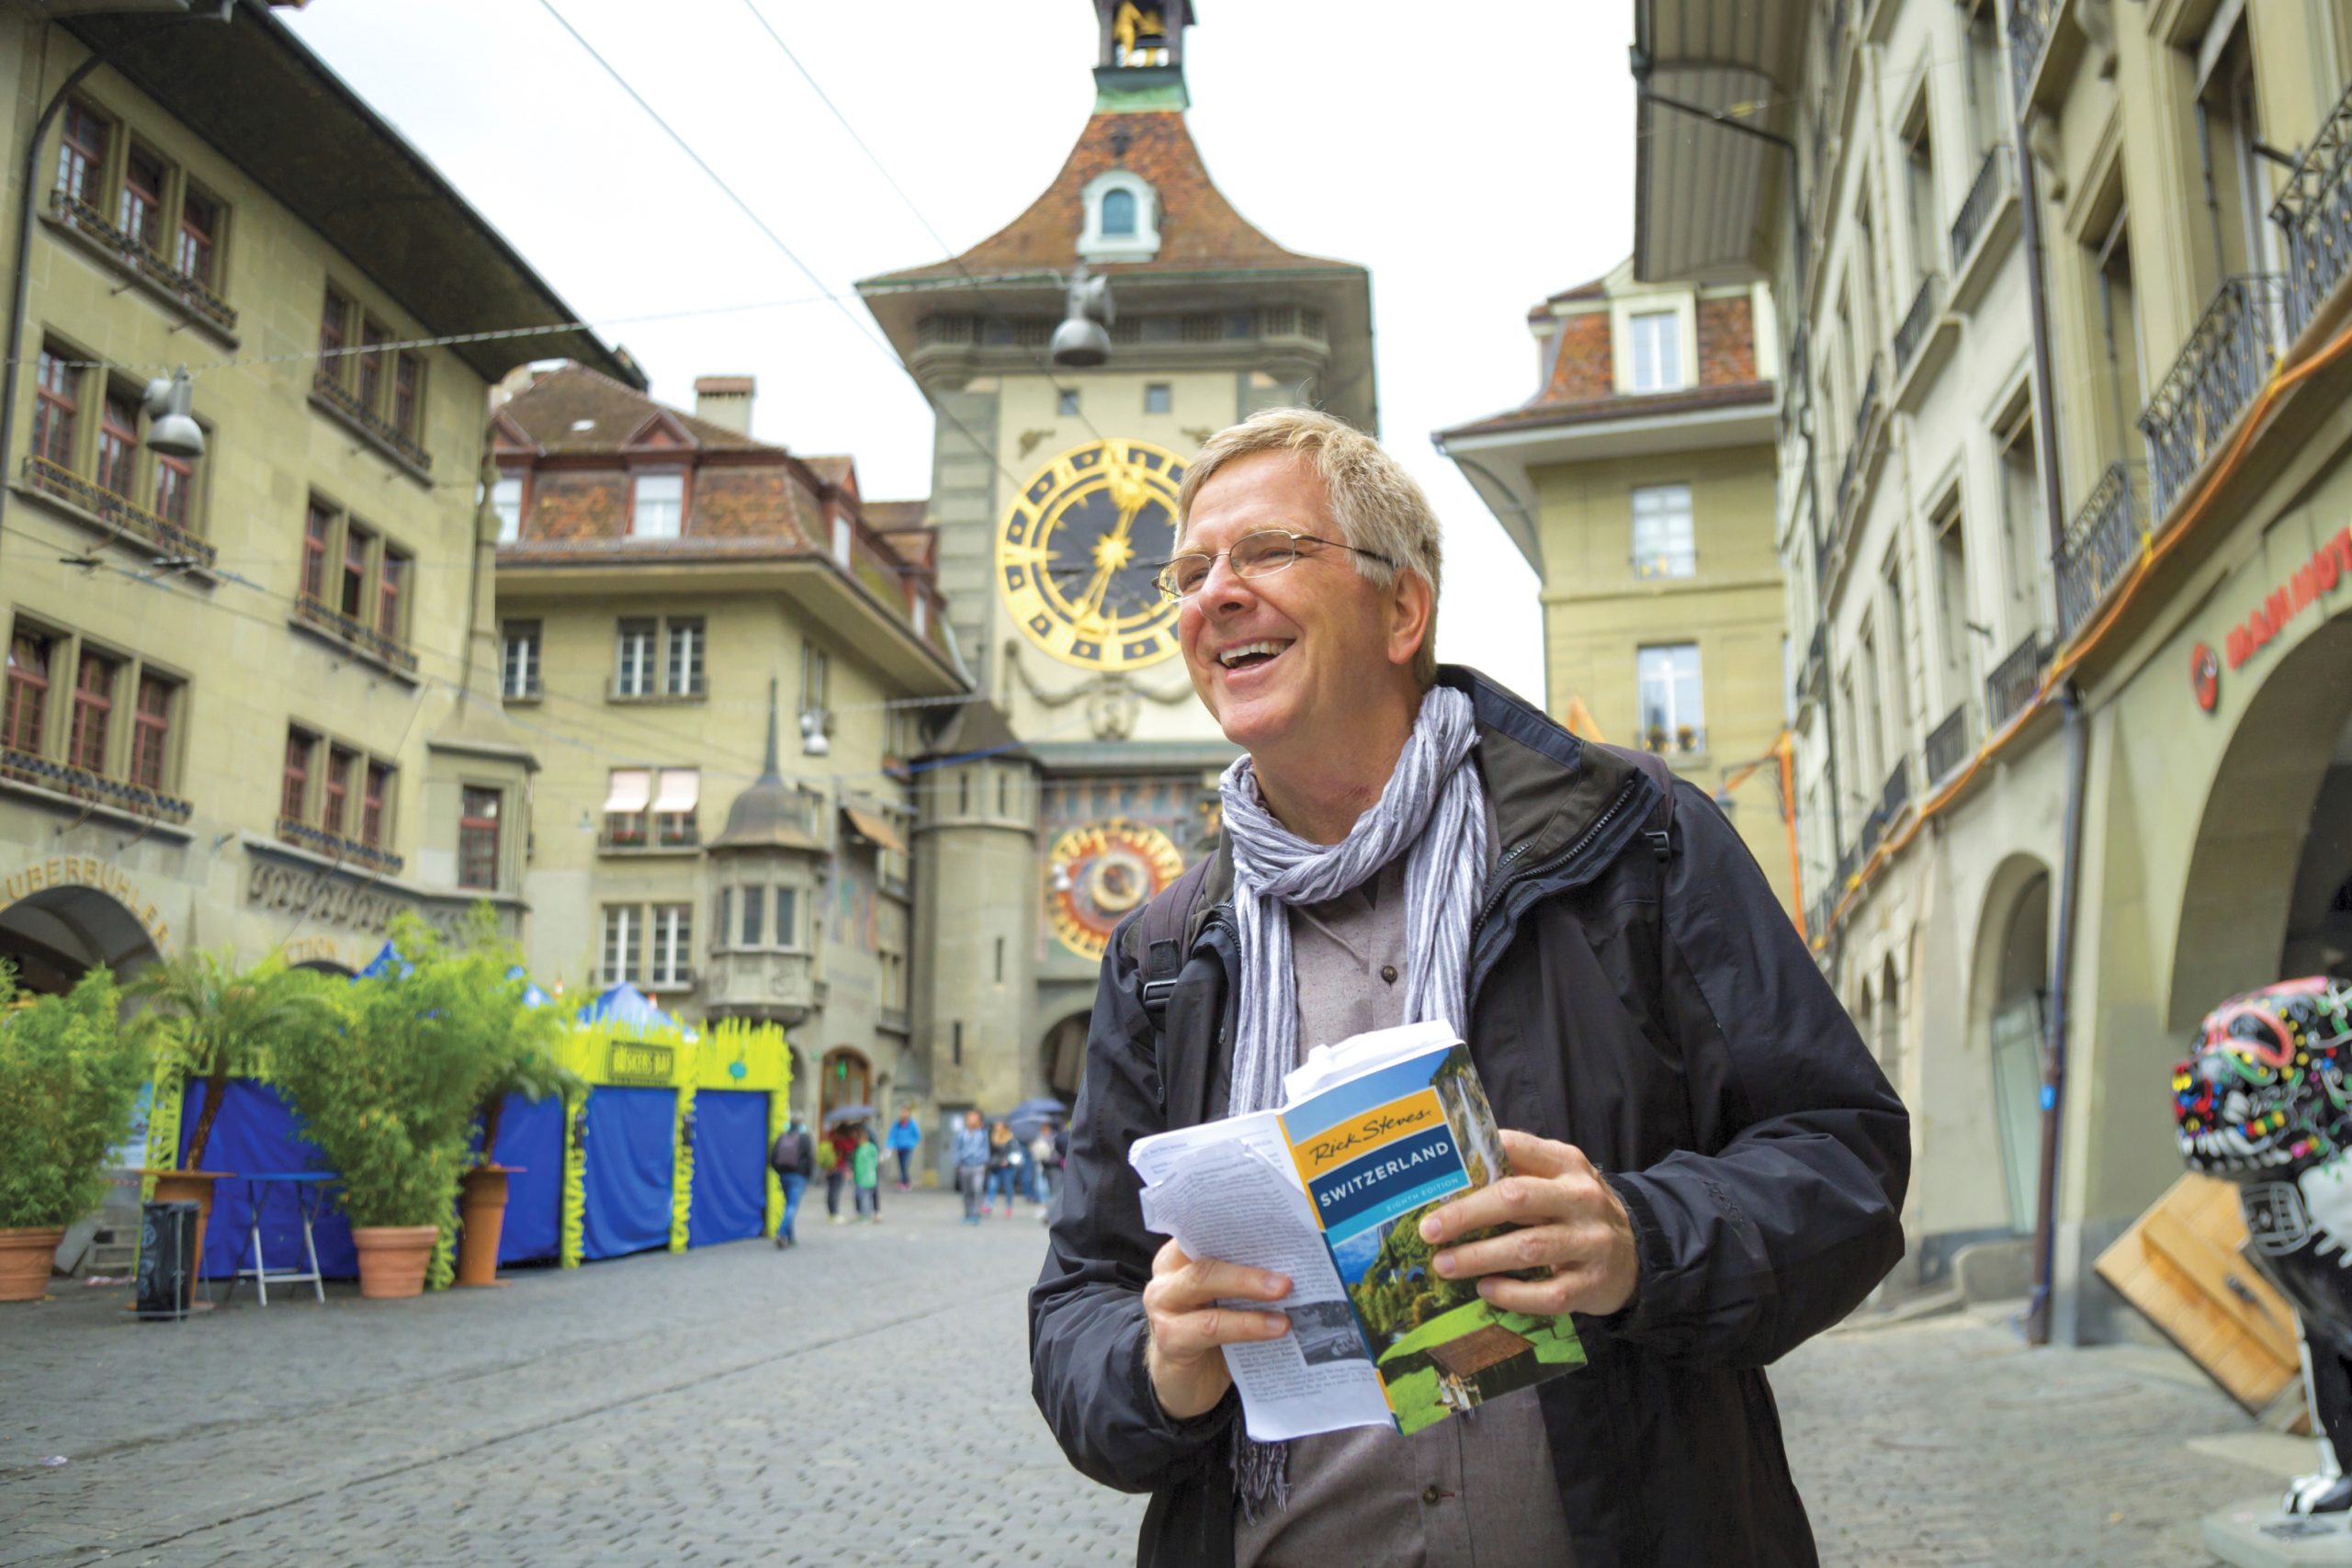 Media Advisory: FEAtured Perspectives with Rick Steves